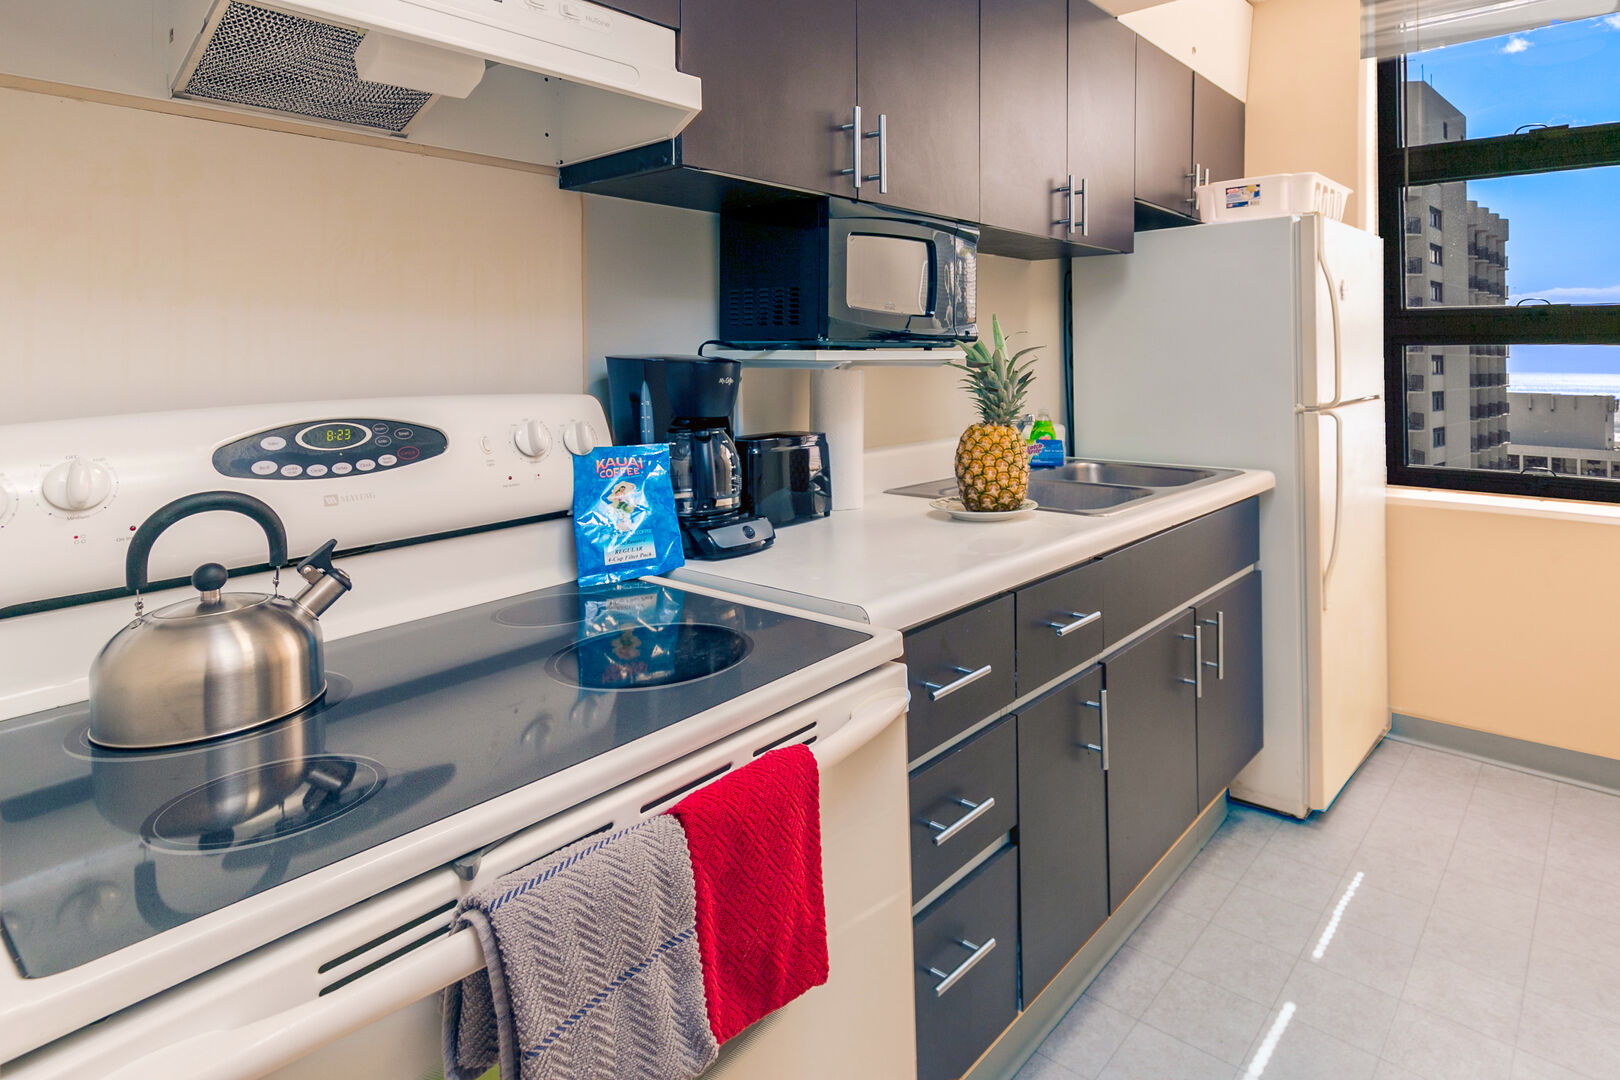 There is a fully equipped kitchen perfect for your culinary needs!